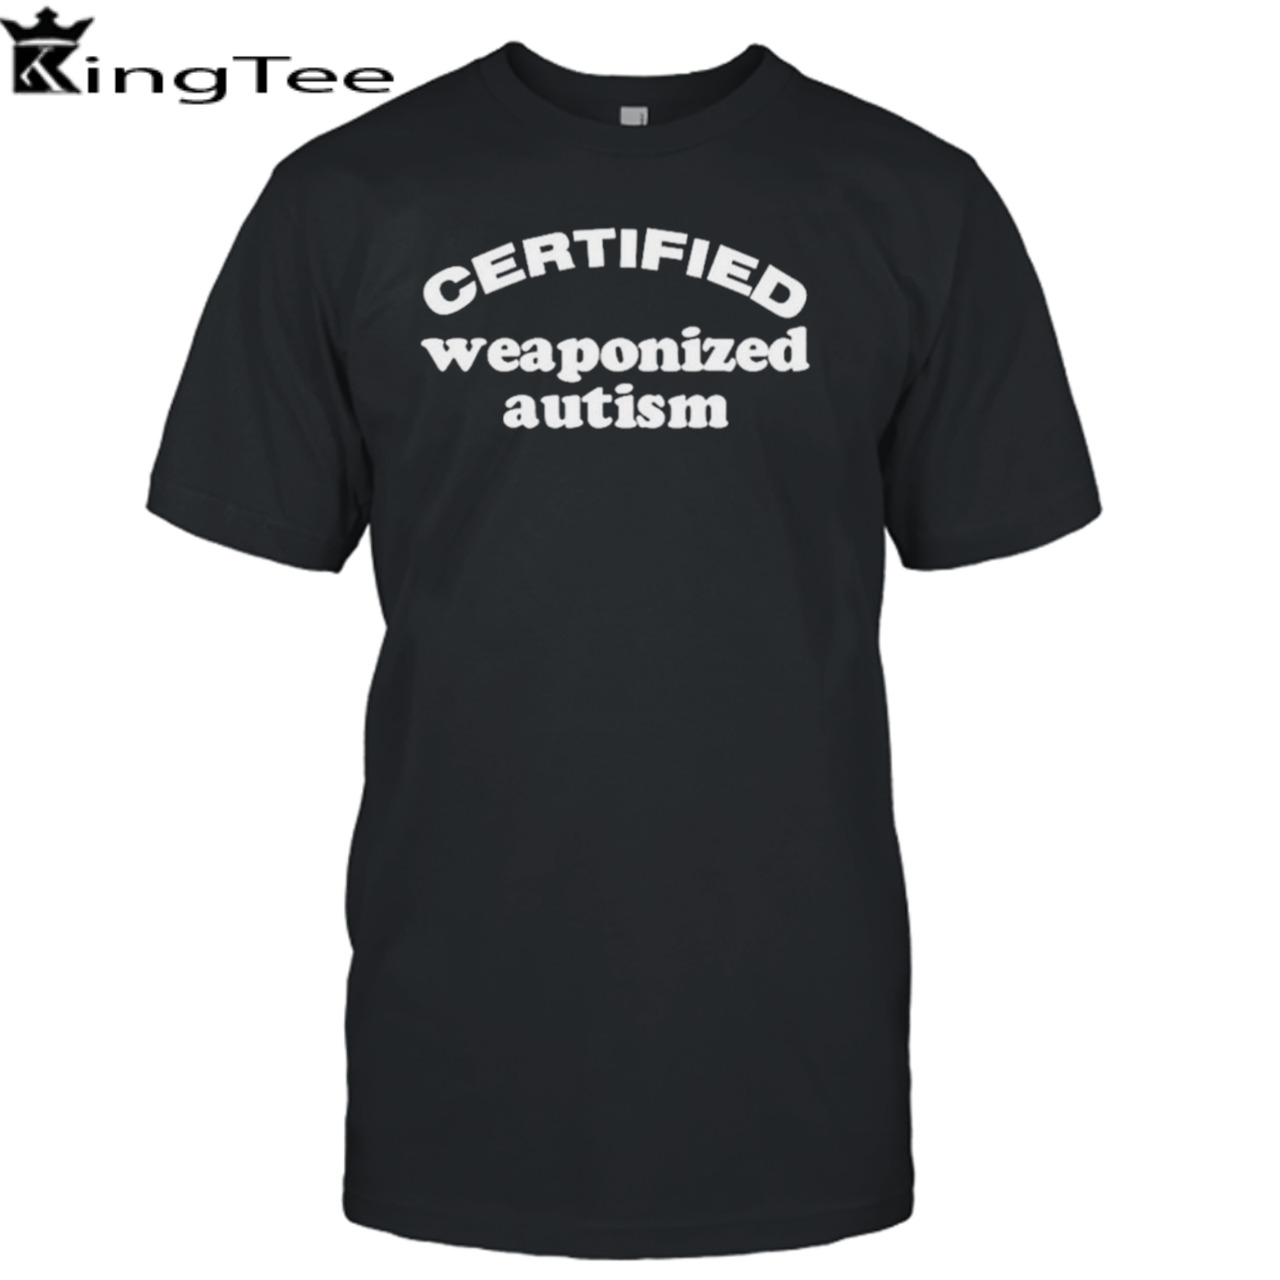 Certified weaponized autism shirt